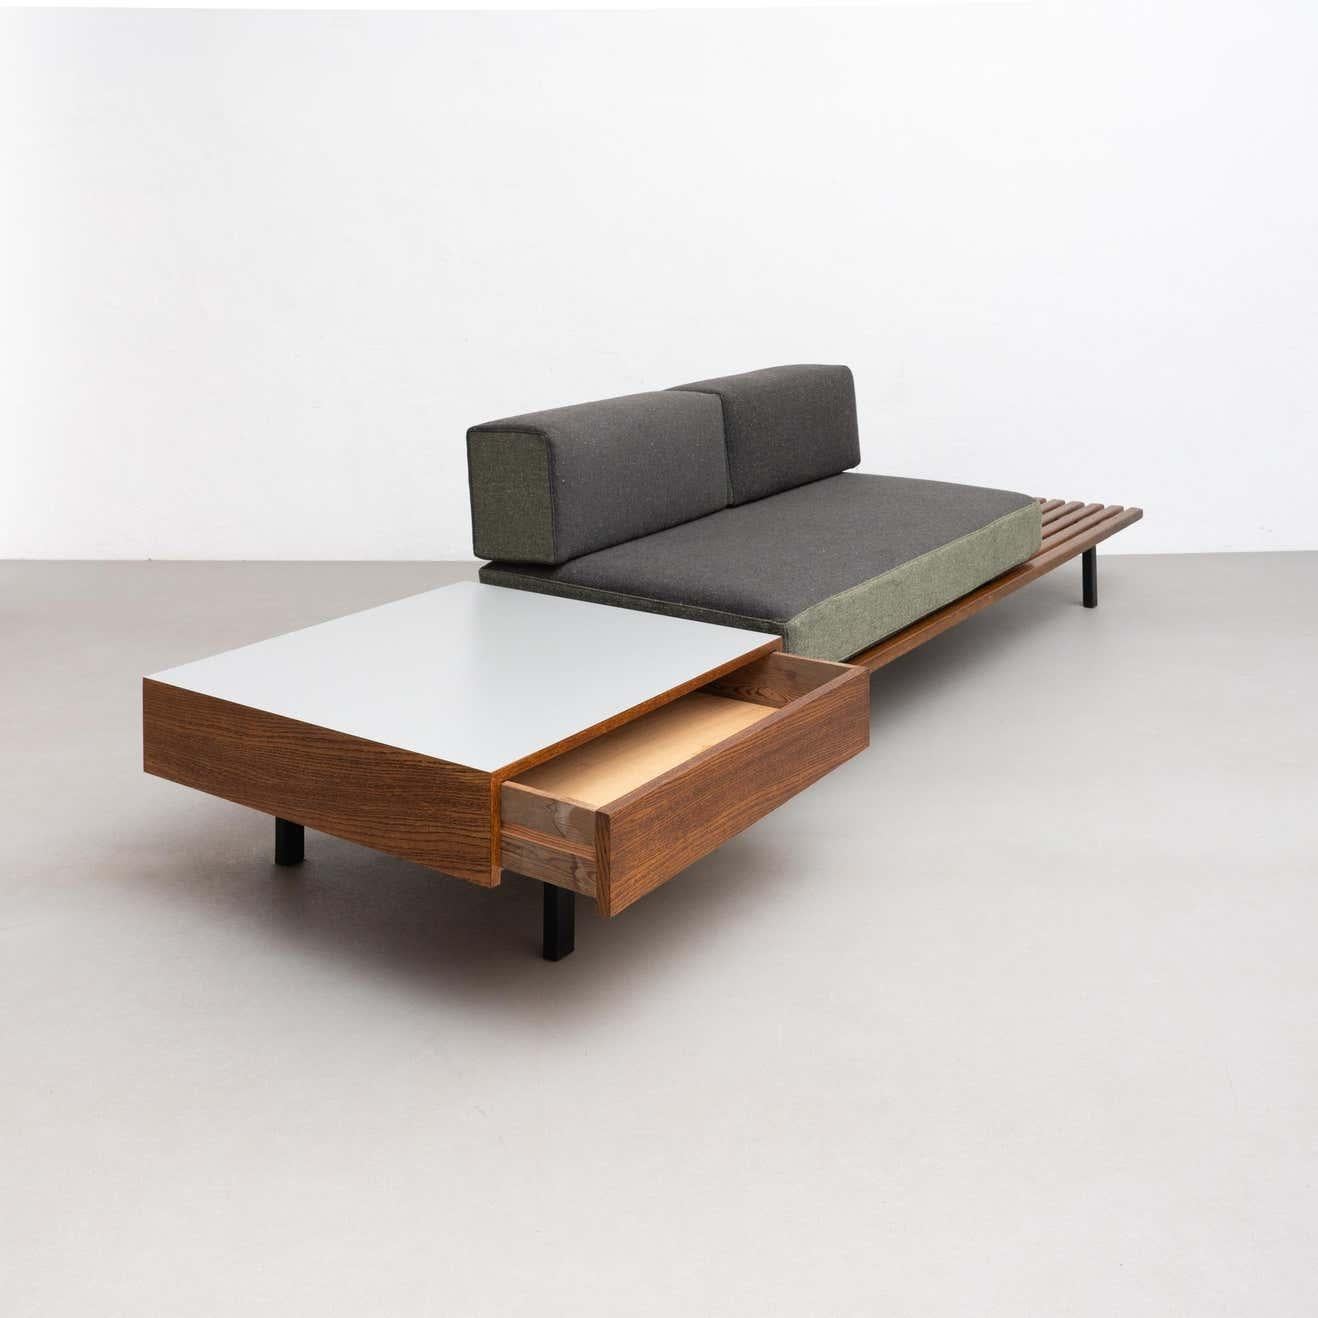 This stunning bench with drawer was designed by the renowned French designer Charlotte Perriand in 1958, while working on a project in Cite Cansado, Mauritania. The bench is made of mahogany wood, oak, plastic laminated covered wood, lacquered metal